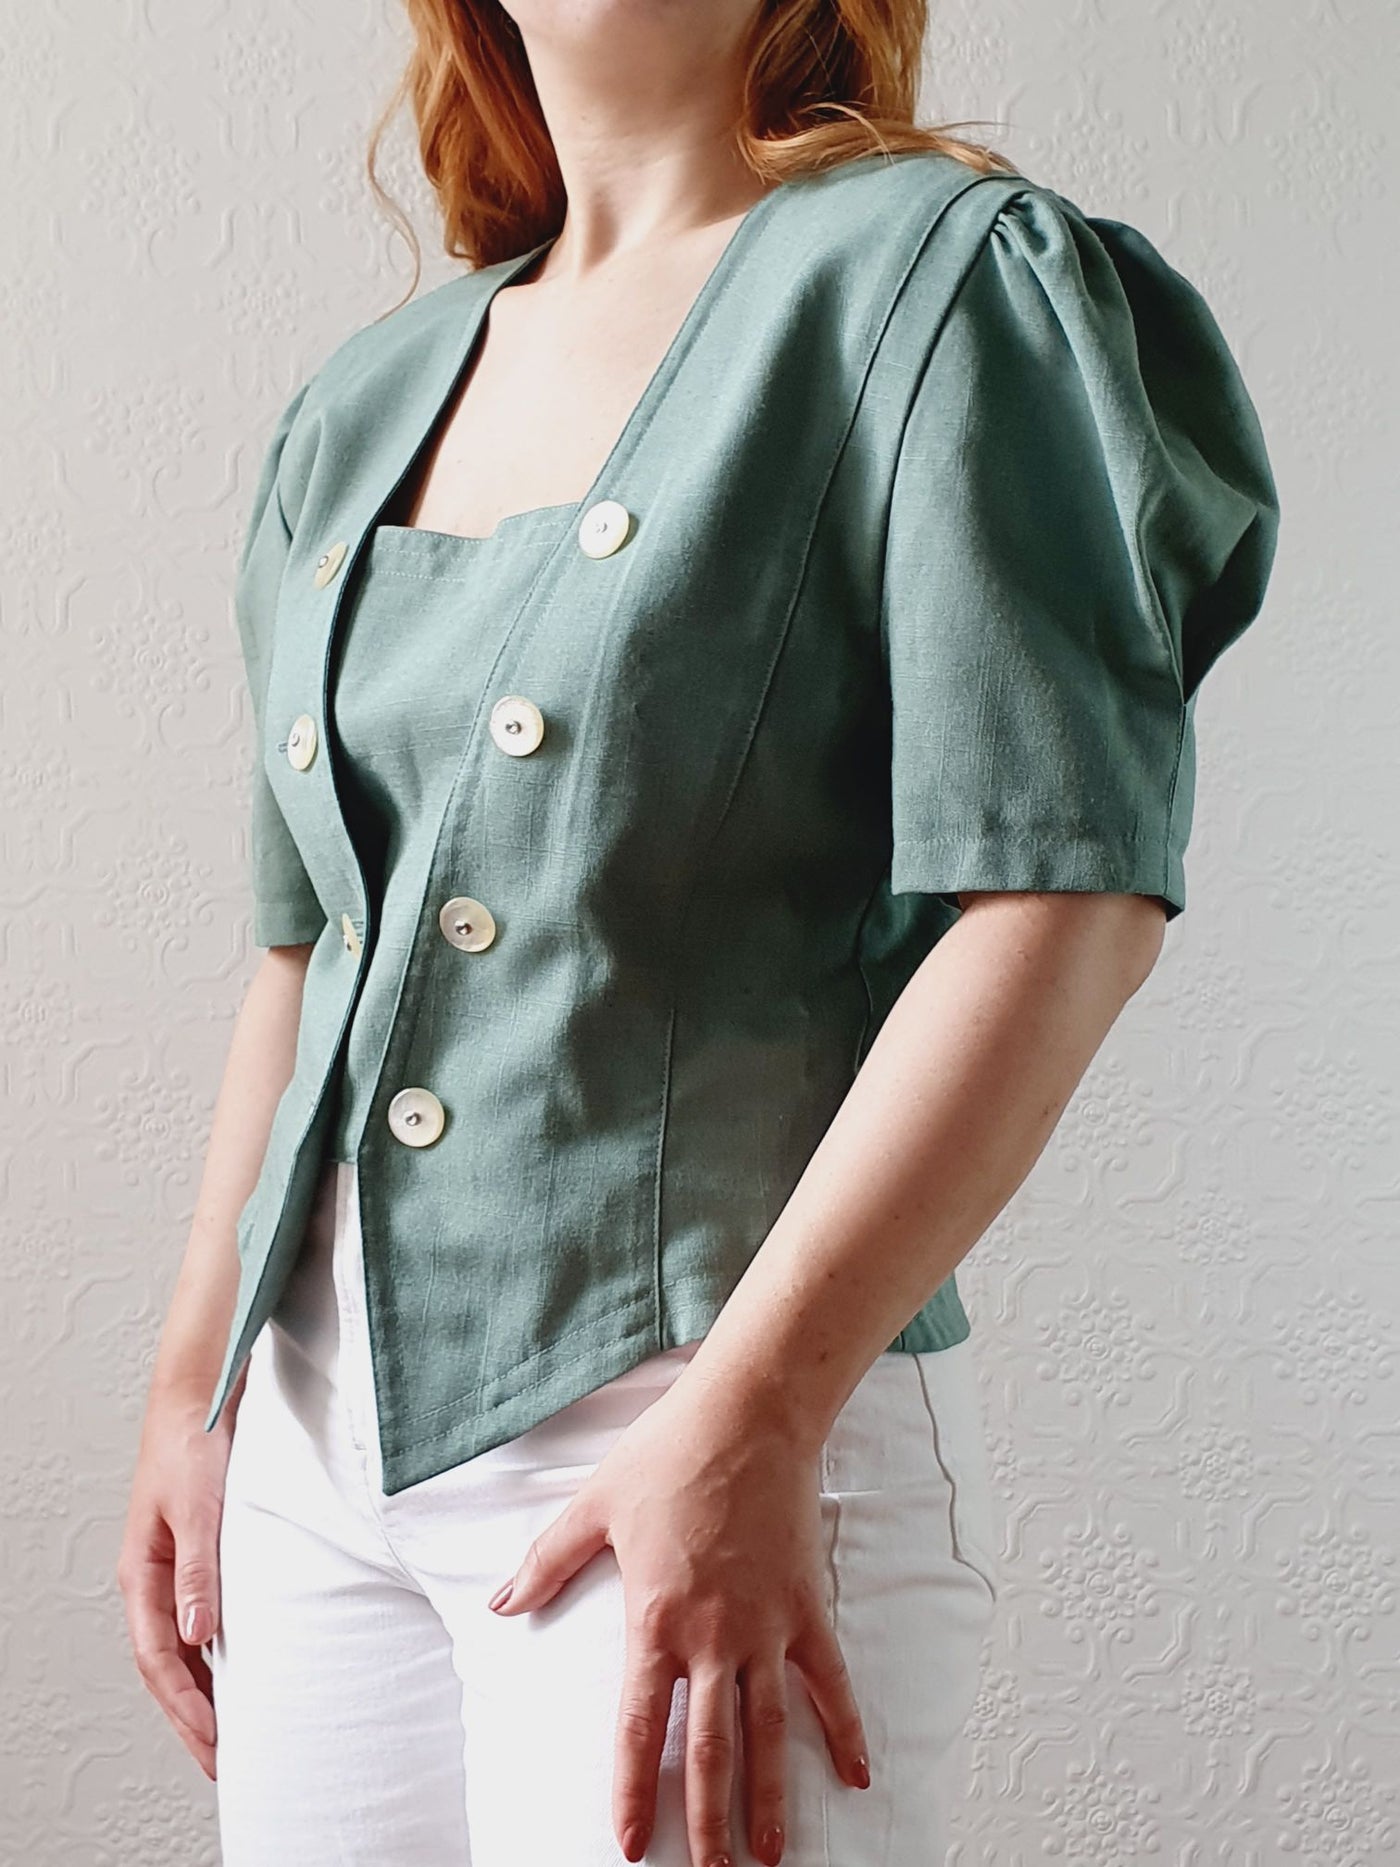 Vintage 80s Muted Green Puff Sleeve Blouse with Square Neckline - M